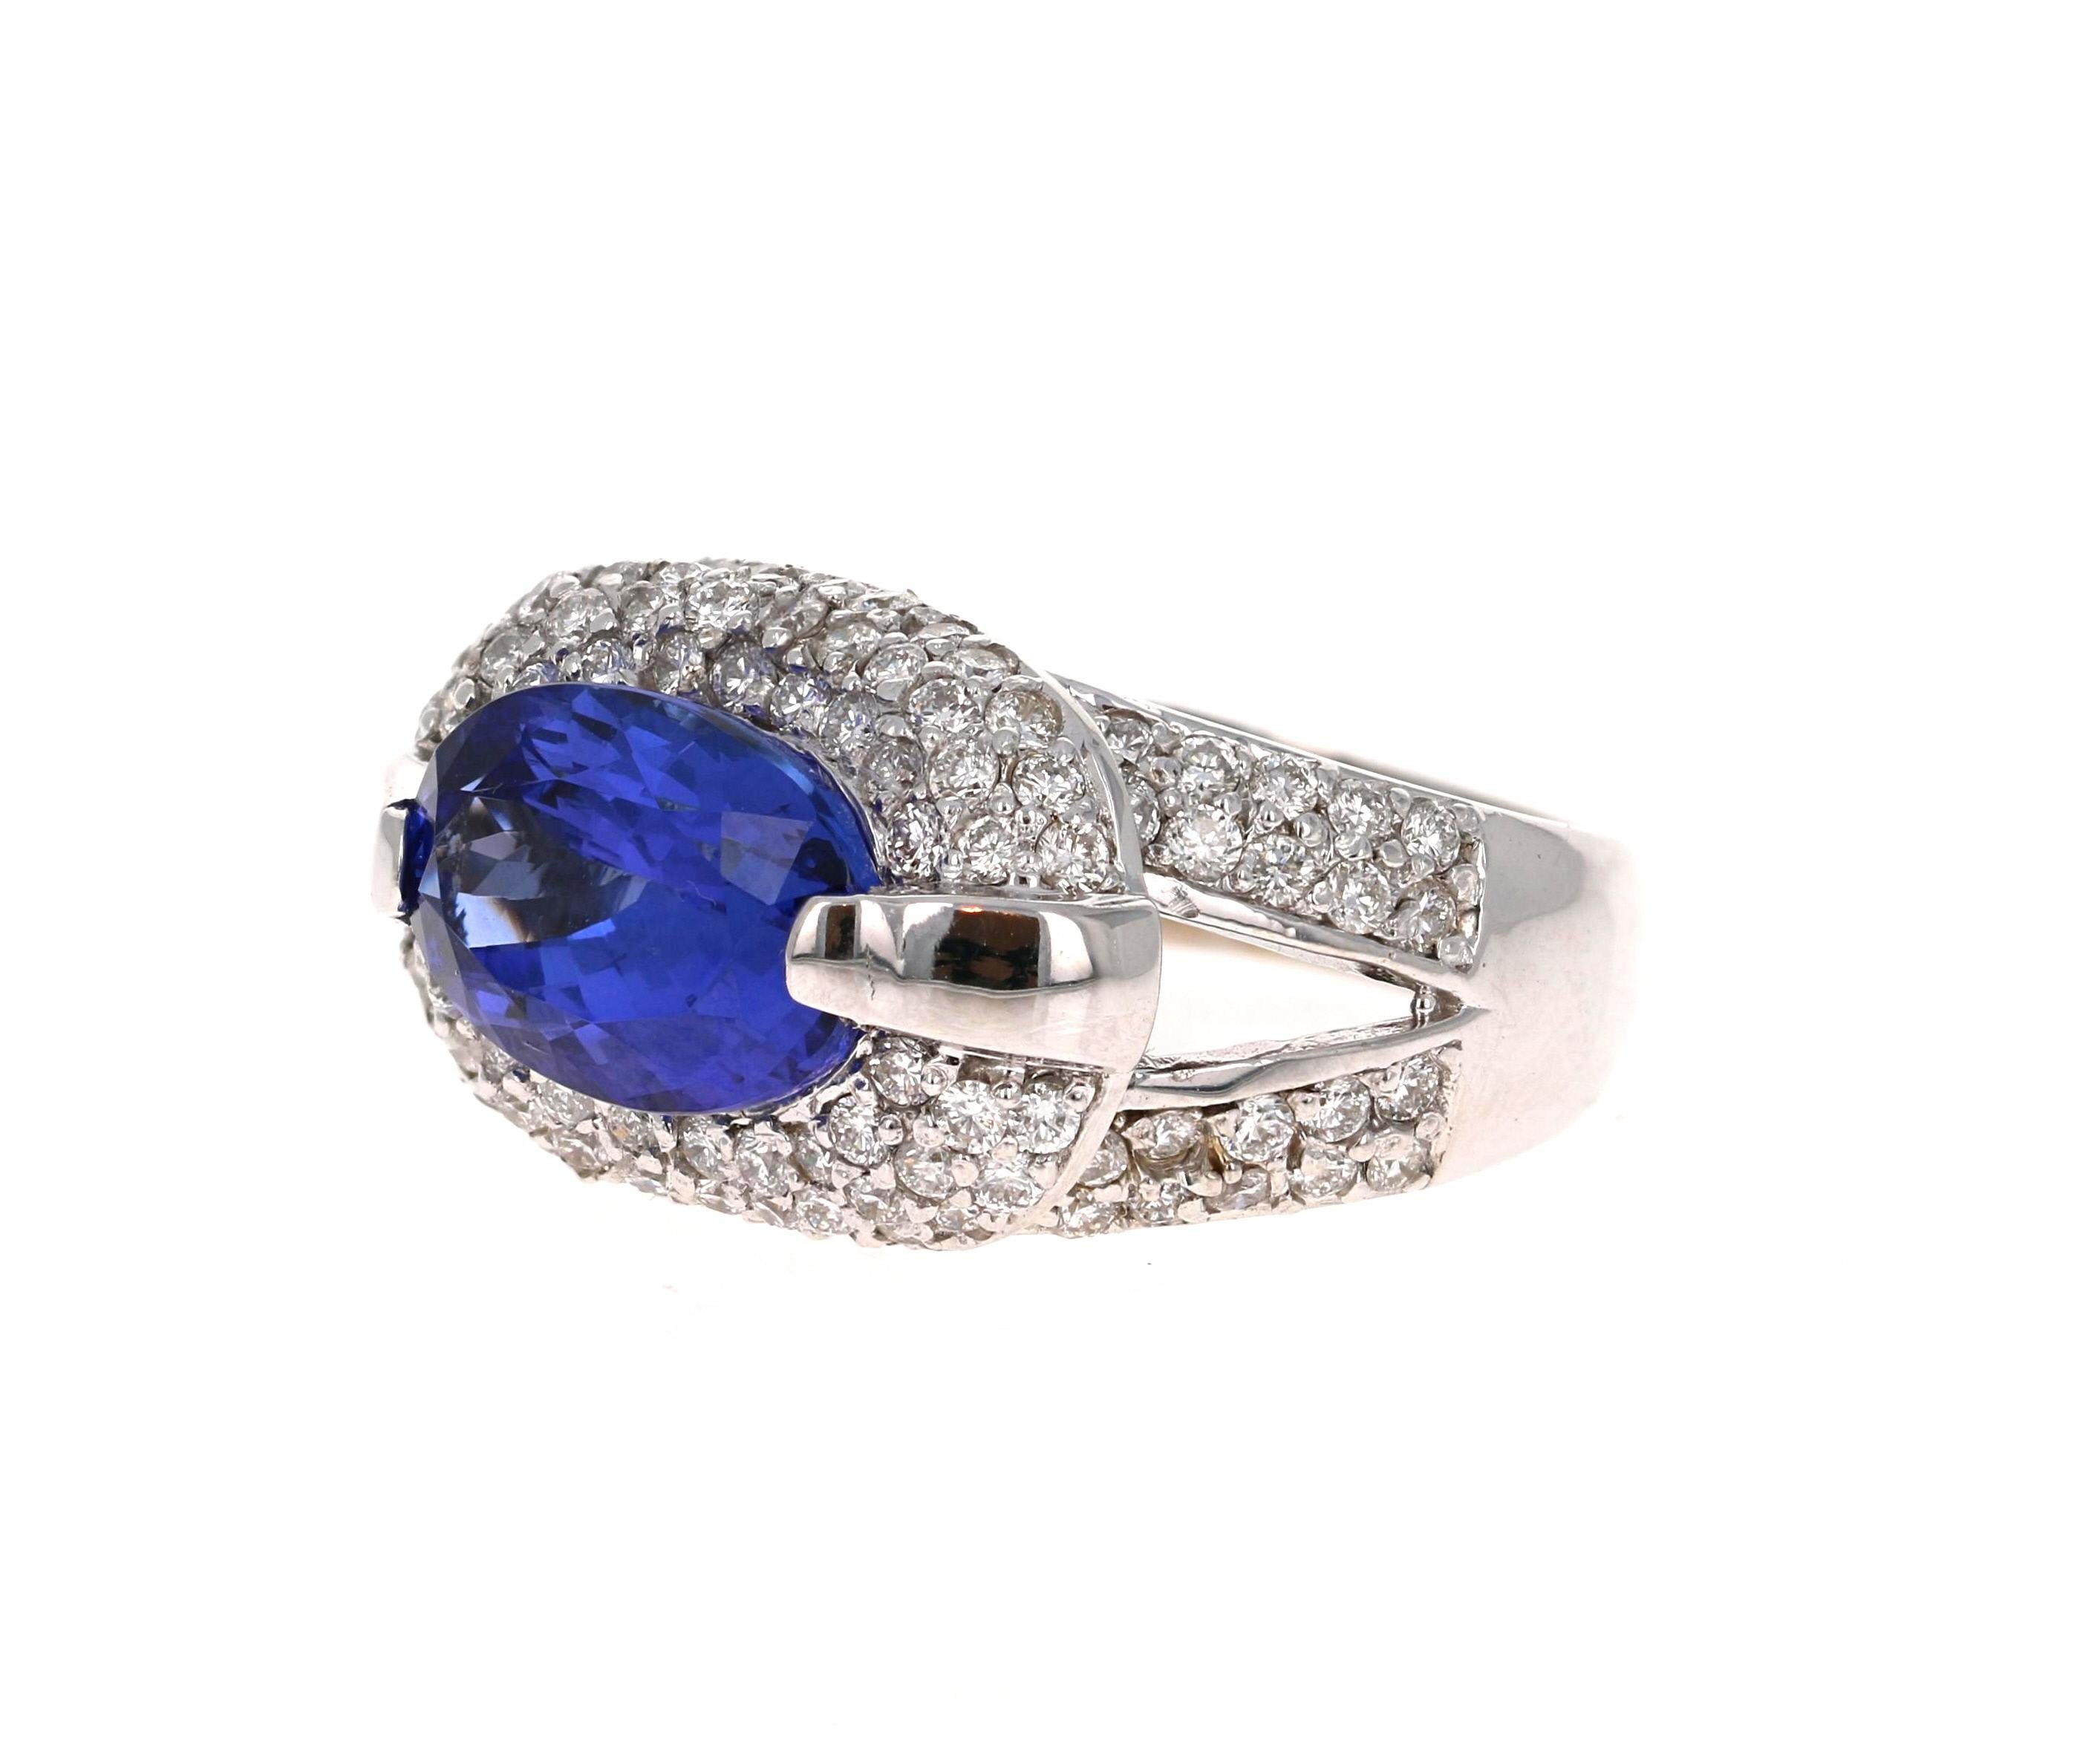 Elegant & Magnificent, Classic Tanzanite & Diamond Ring! 

This Ring has a radiant bluish-purple Oval Cut Tanzanite weighing 2.97 Carats. It is surrounded by 114 Round Cut Diamonds that weigh 1.42 Carats with a Clarity and Color of SI/F. The total